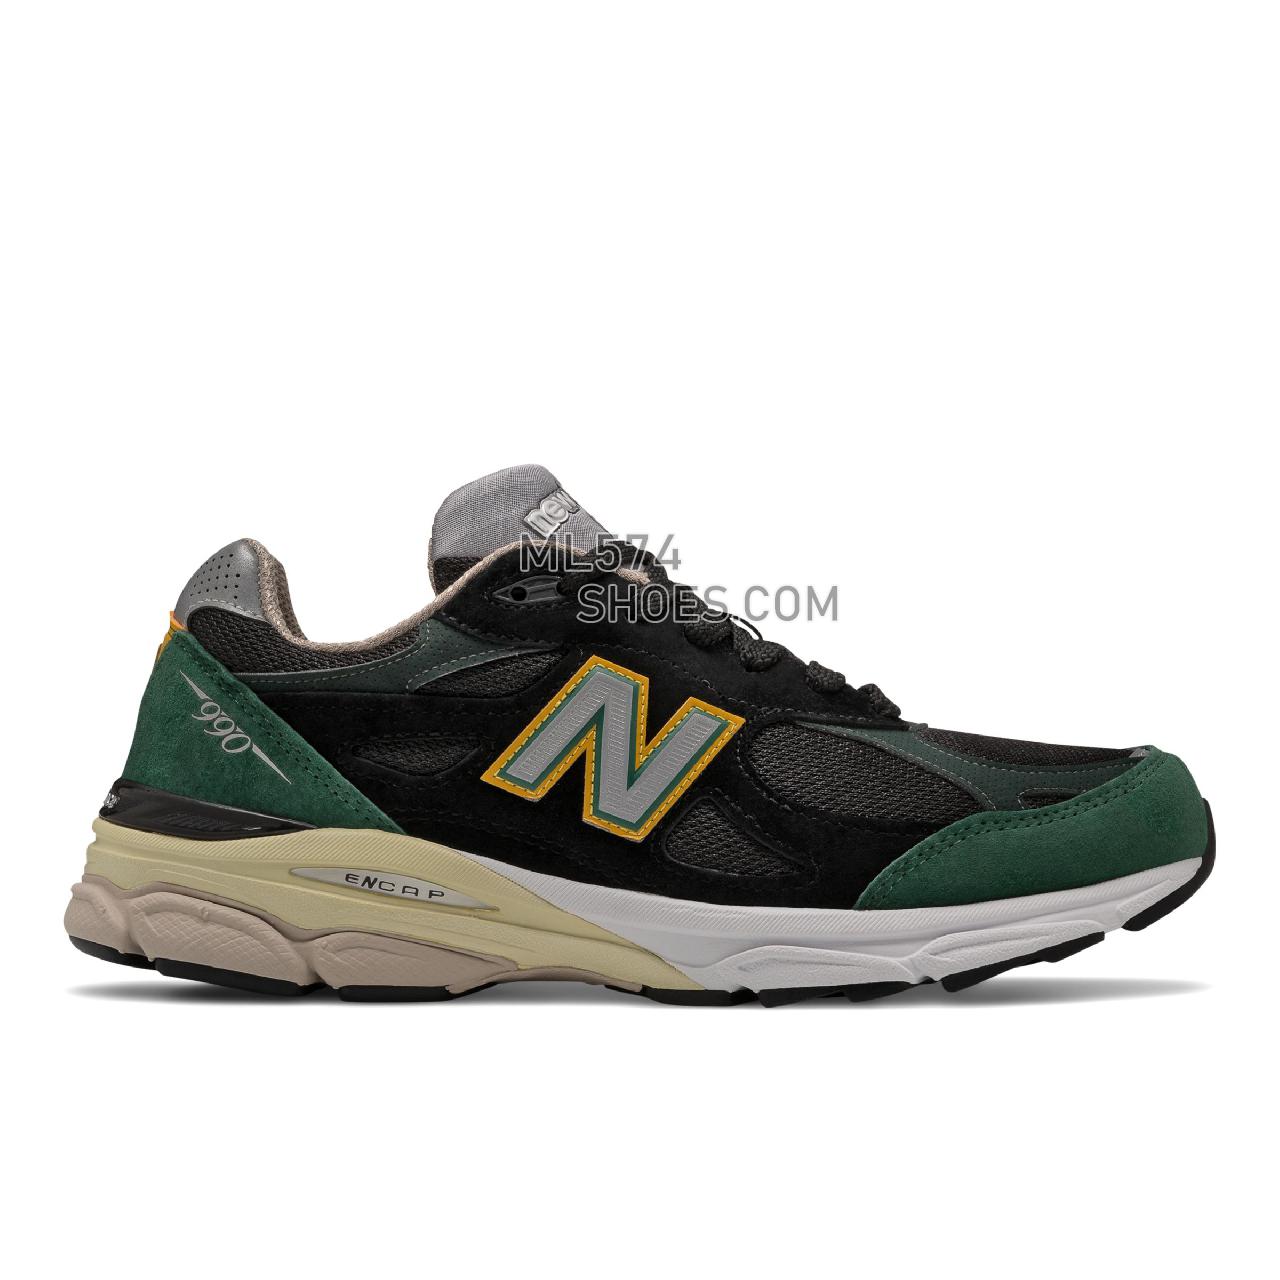 New Balance Made in USA 990v3 - Men's Made in USA And UK Sneakers - Black with Green - M990CP3